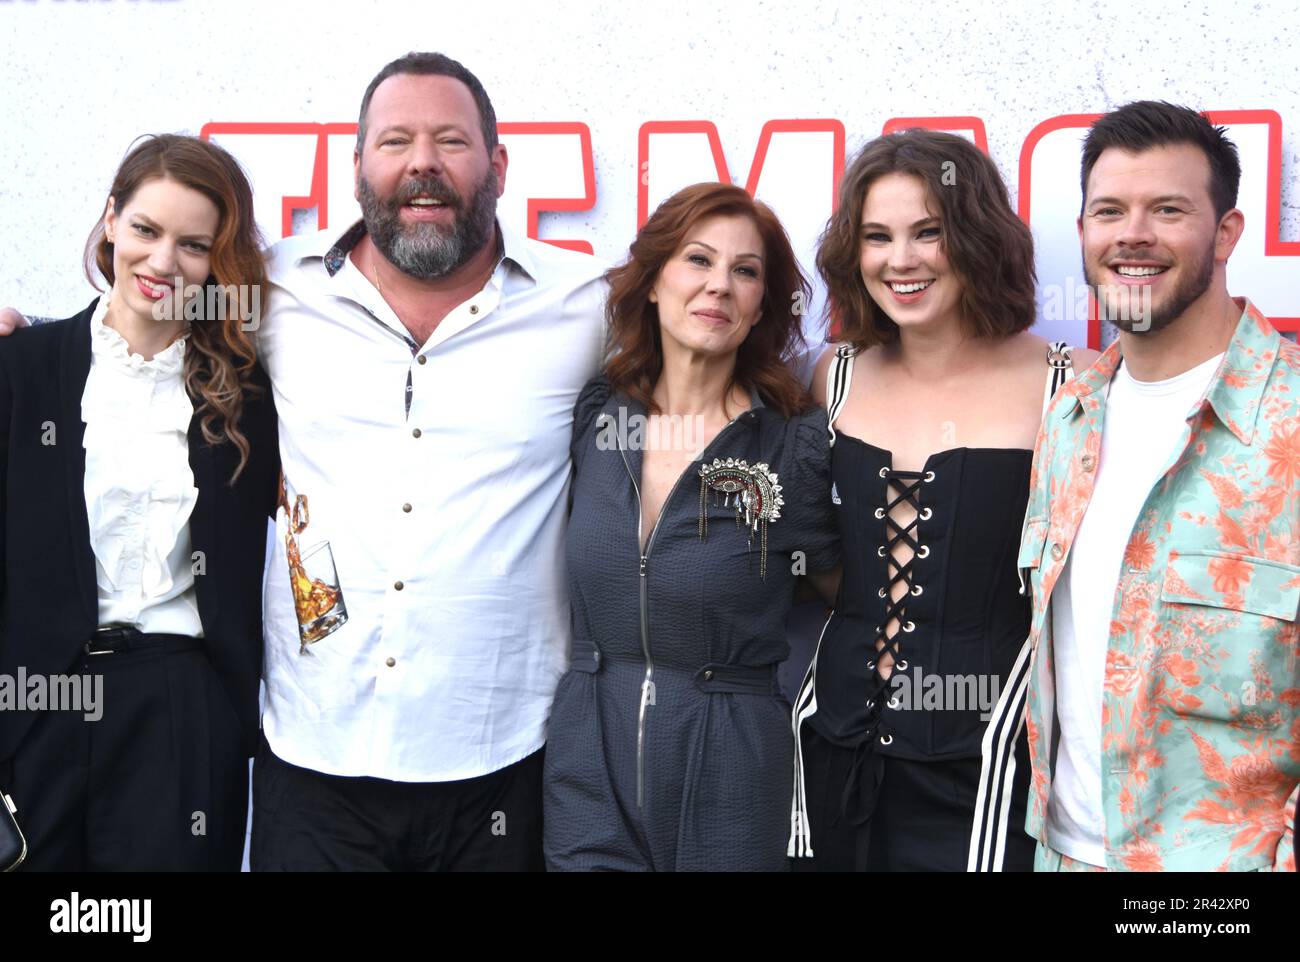 Los Angeles, California. 25th May 2023 (L-R) Actress Iva Babic, Comedian/Actor Bert Kreischer, Actress Stephanie Kurtzuba, Actress Jess Gabor and Actor/Comedian Jimmy Tatro attend the Los Angeles Premiere of Sony Pictures' 'The Machine' at Regency Village Theatre on May 25, 2023 in Los Angeles, California. , USA. Photo by Barry King/Alamy Live News Stock Photo